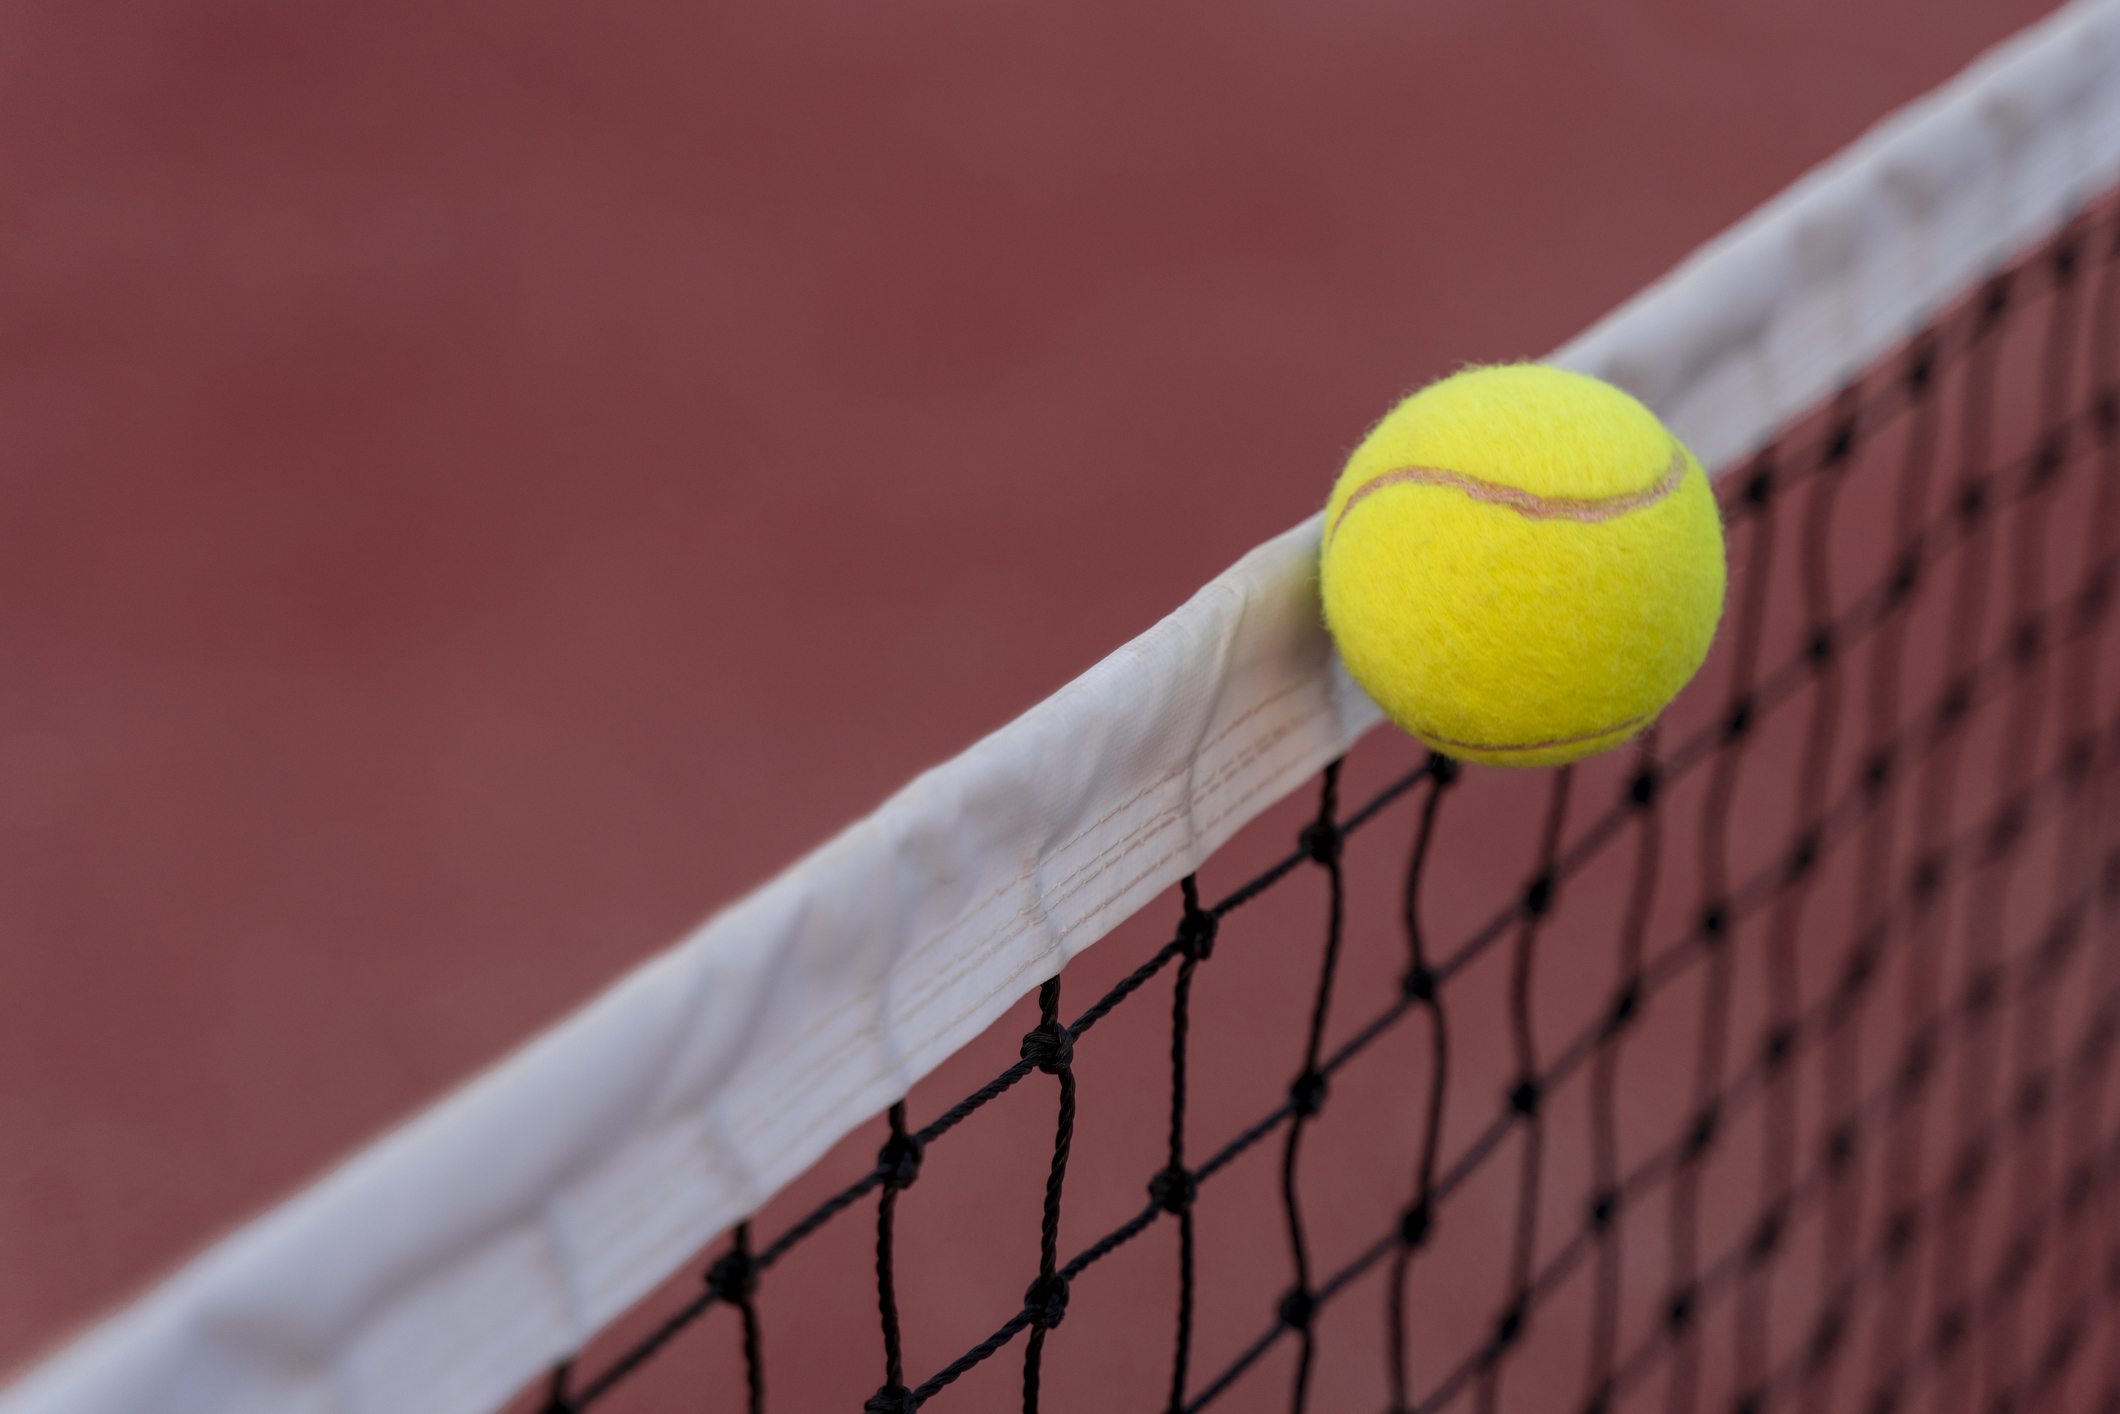 A tennis ball hitting the net on a red field.